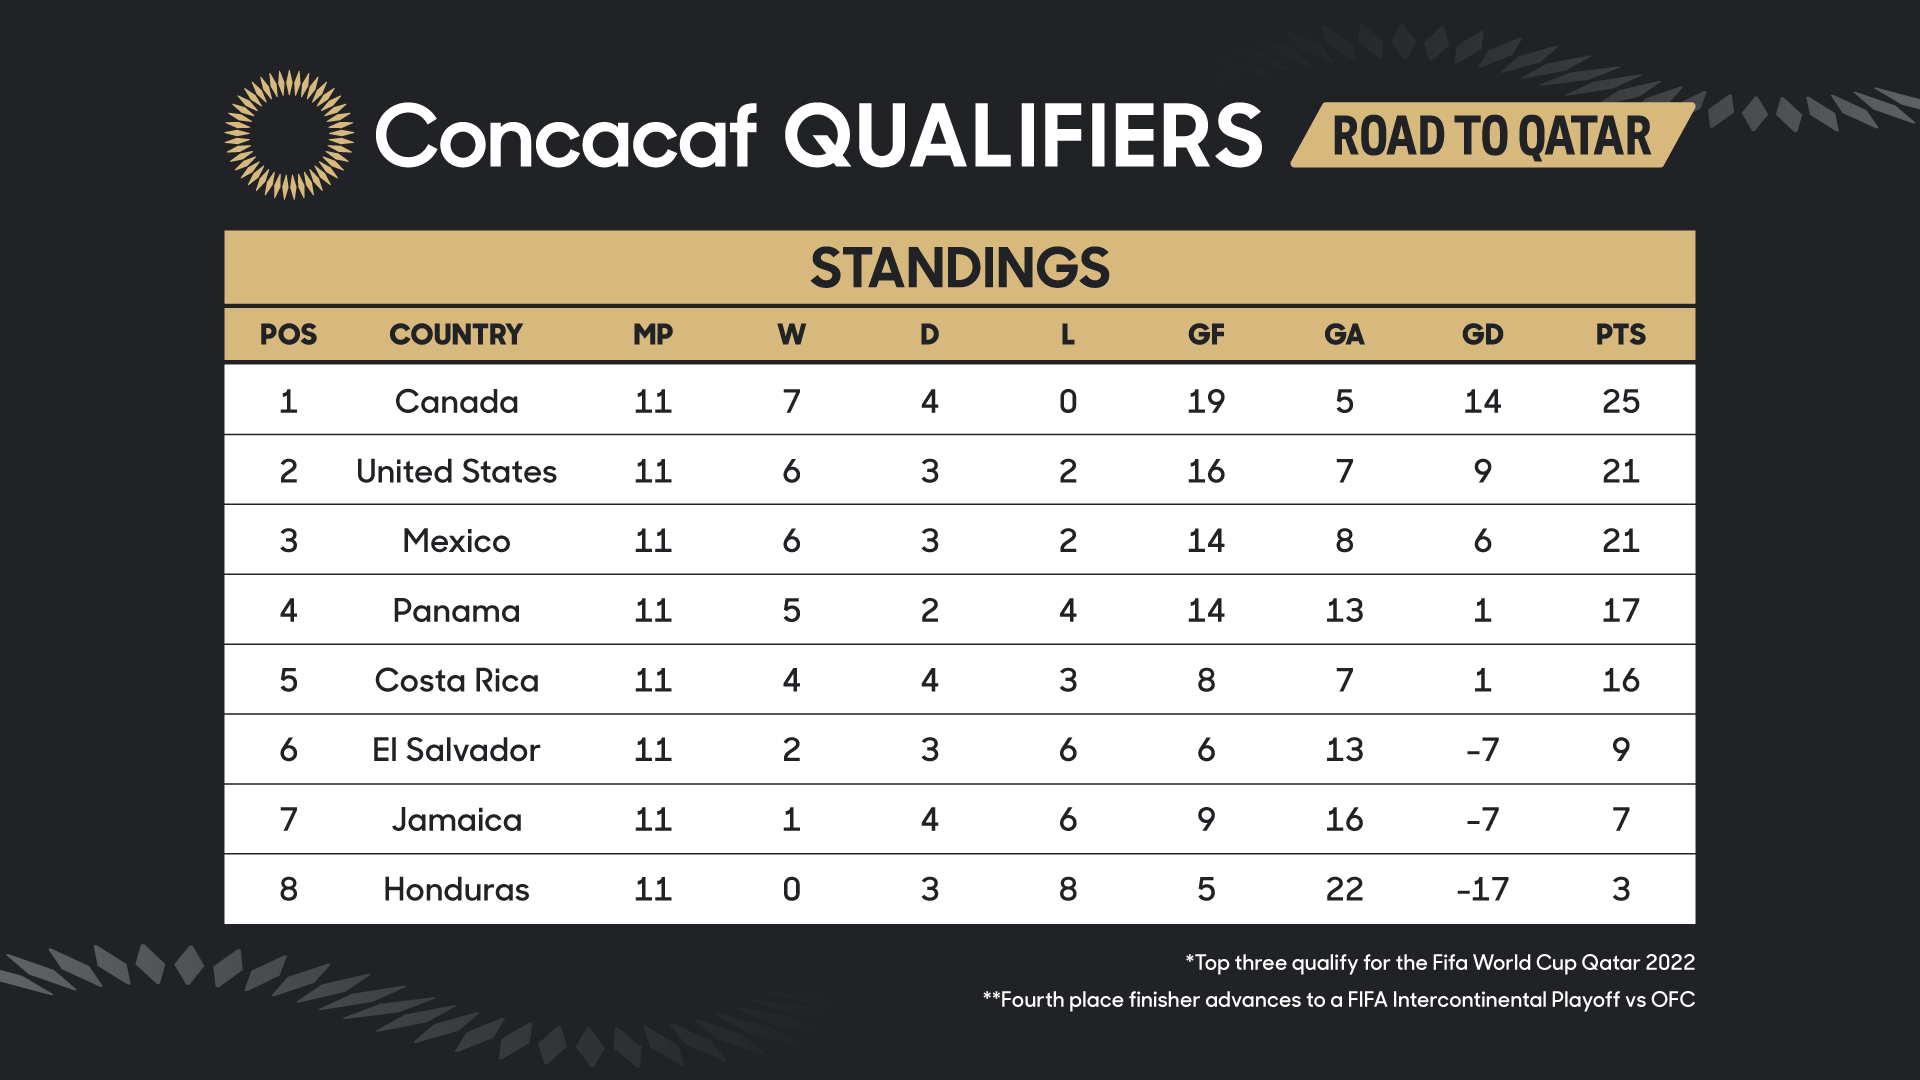 Concacaf confirms times, venues for final slate of World Cup Qualifying